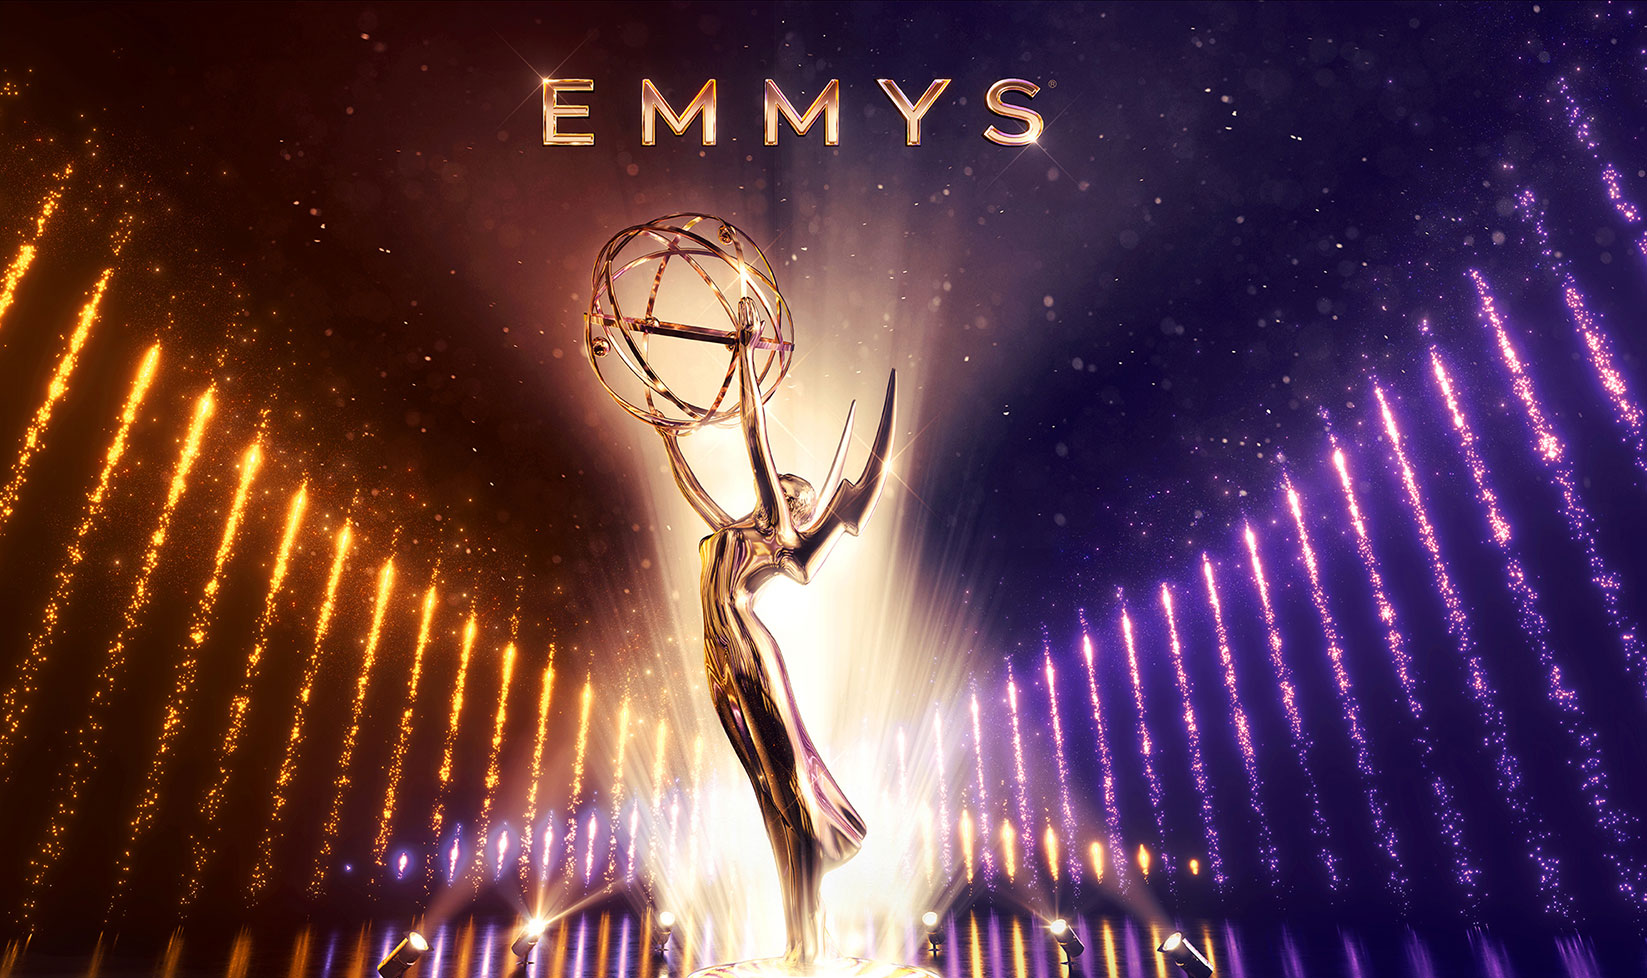 Emmys 2020 Big Wins for ‘Watchmen’, But Also Good Shows The Blemish